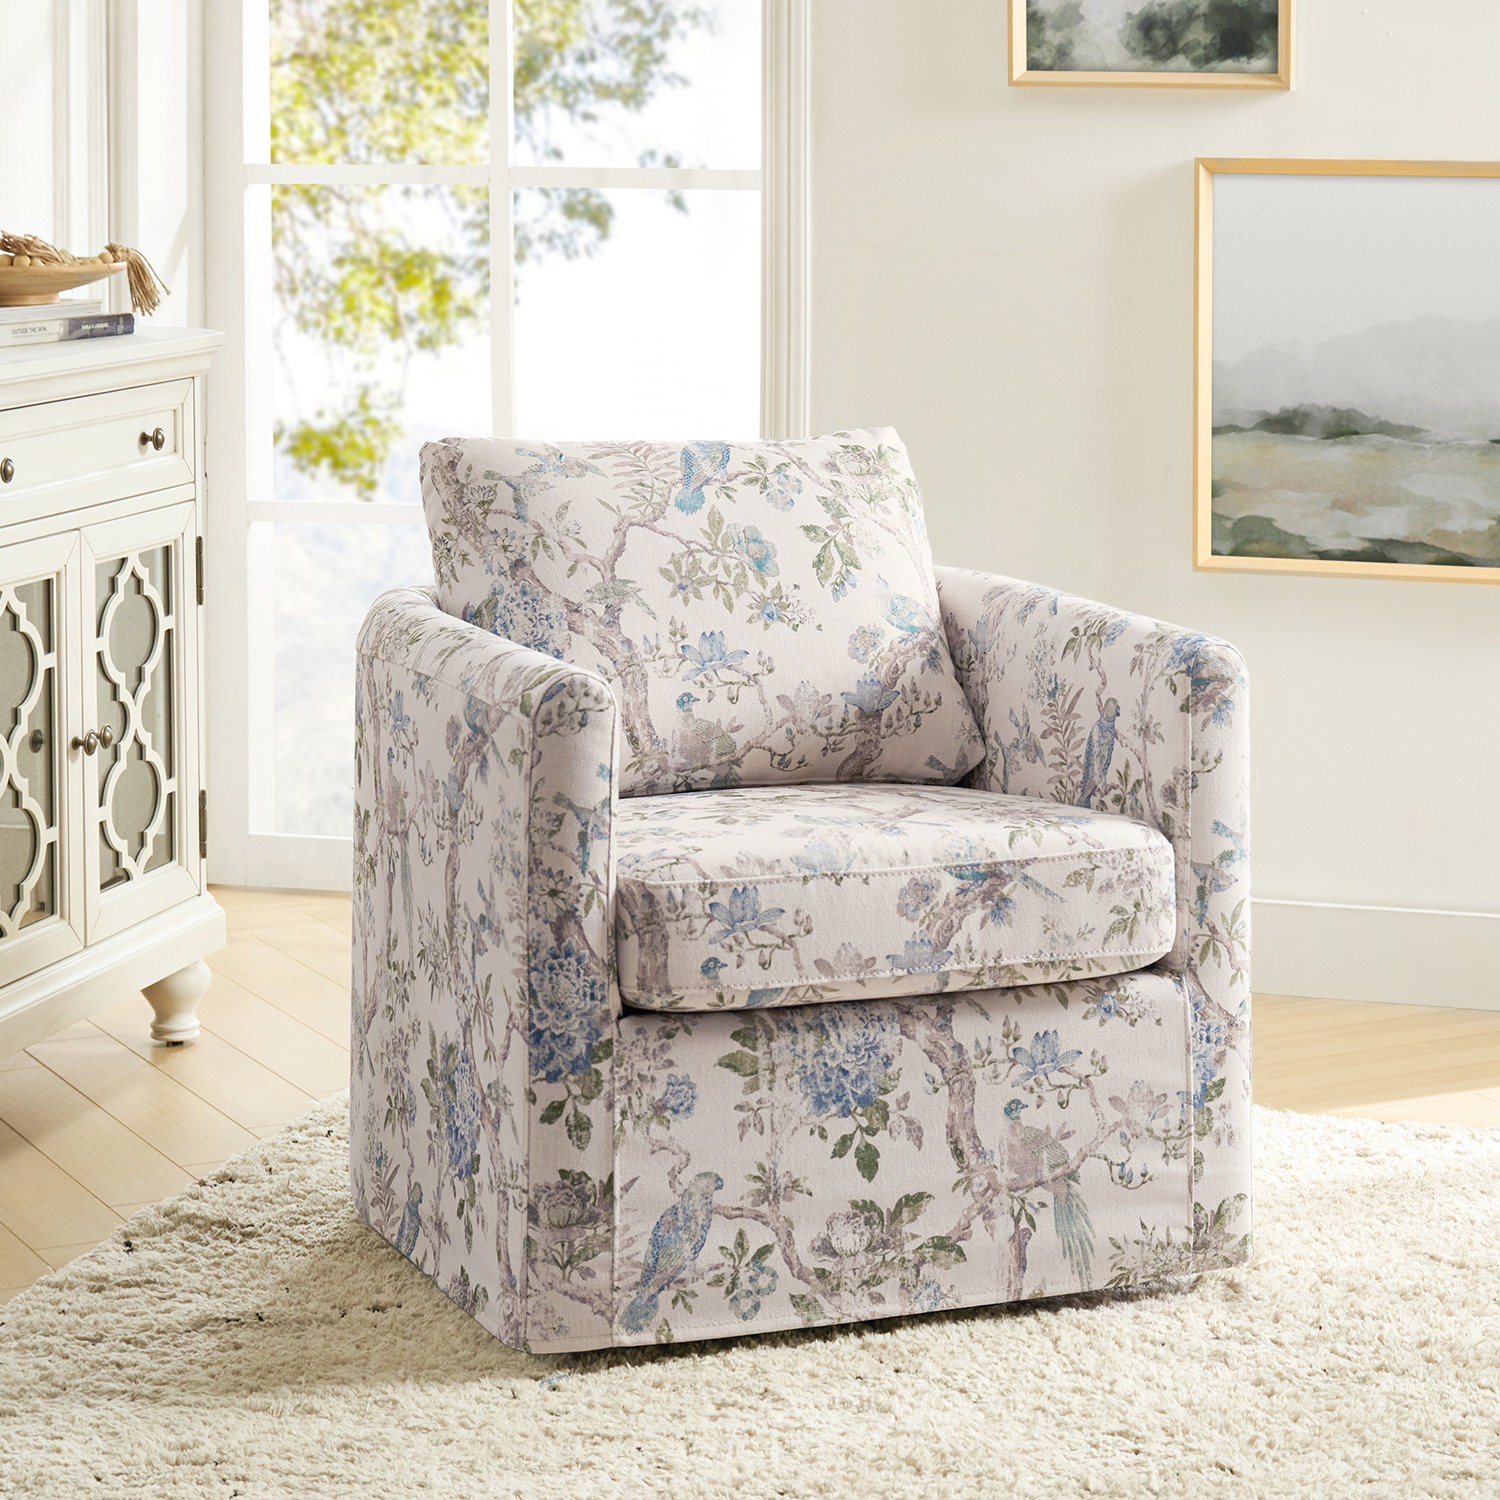 Shop Our Crate & Barrel Harborside Swivel Chair Slipcovers